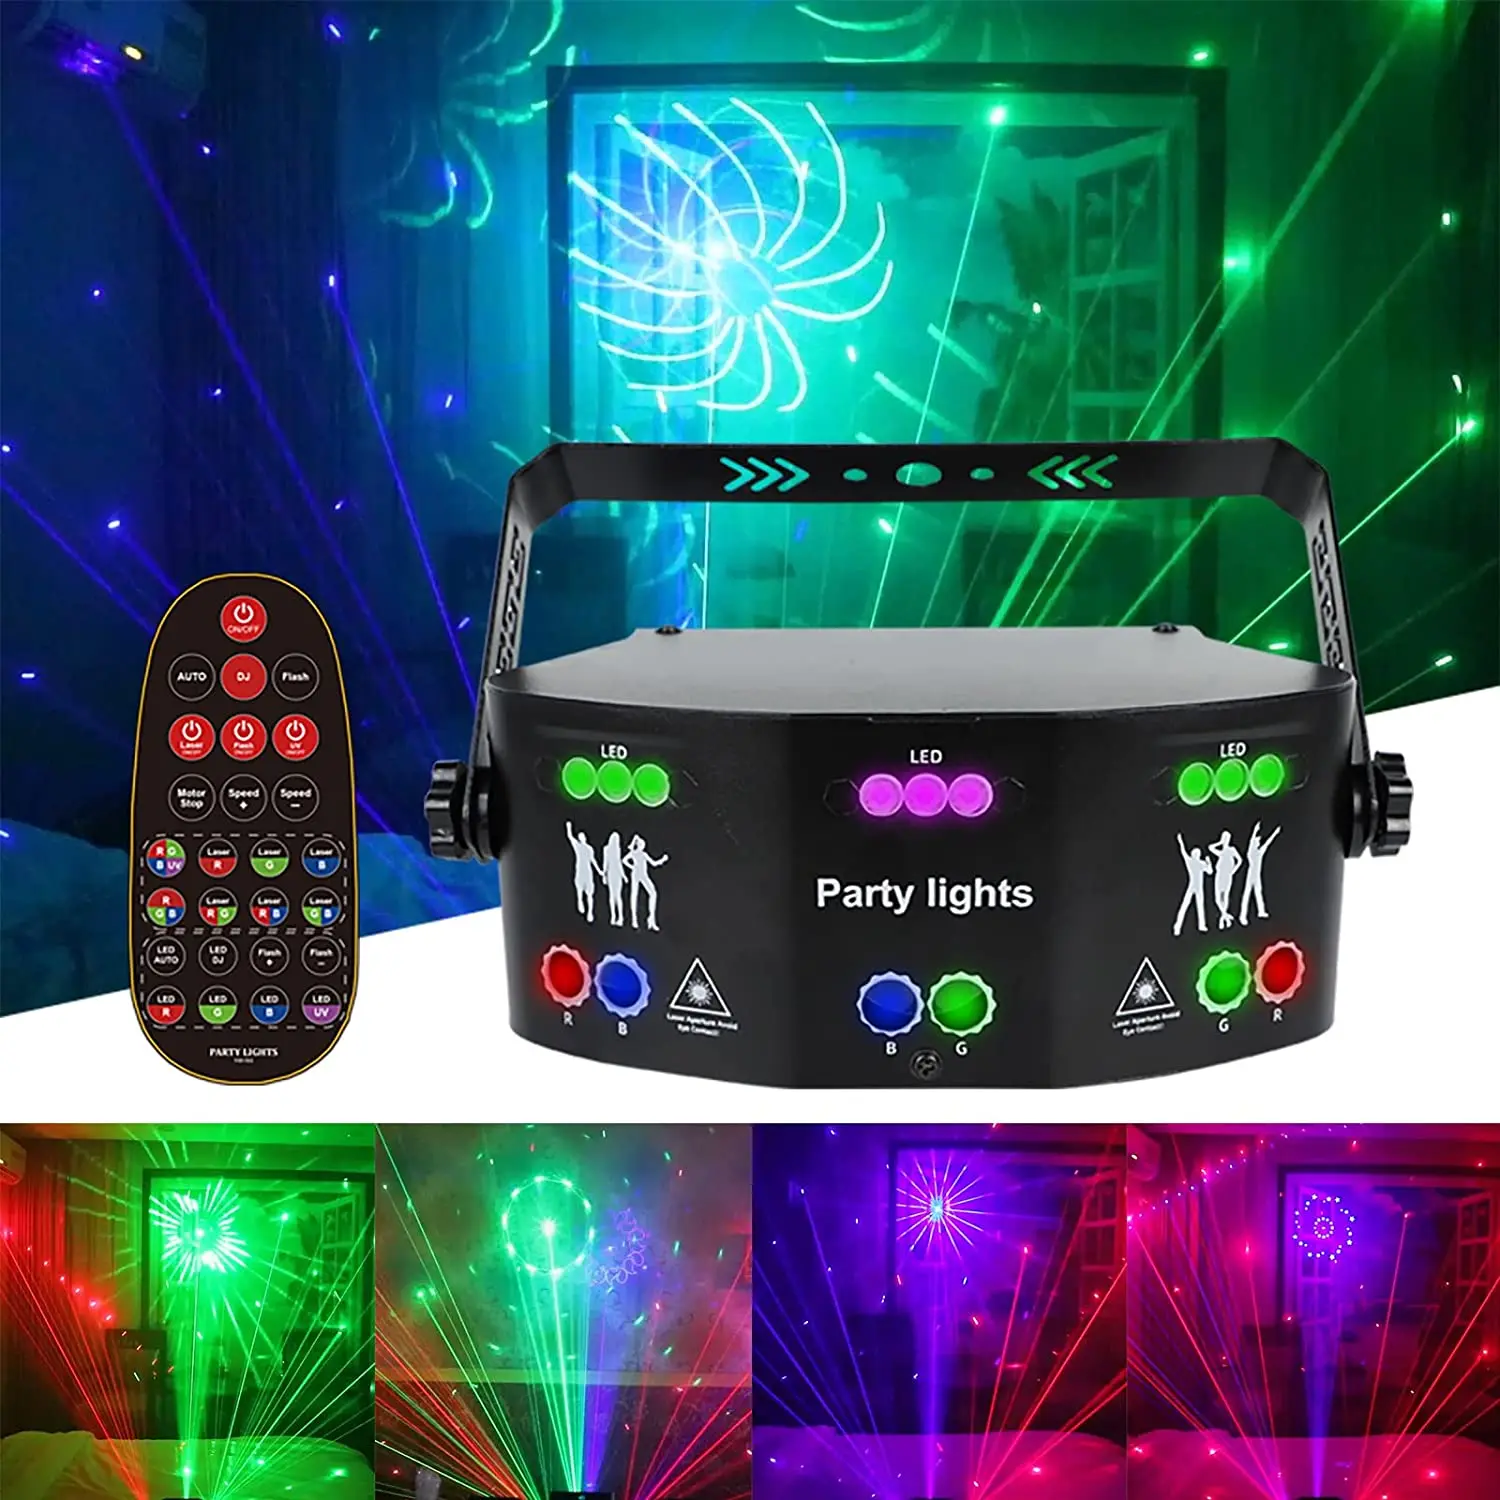 15 Lens Party Lights DJ Disco RGBW UV Strobe Lamp Effect LED Projector Sound Activated Ravelight Remote Control